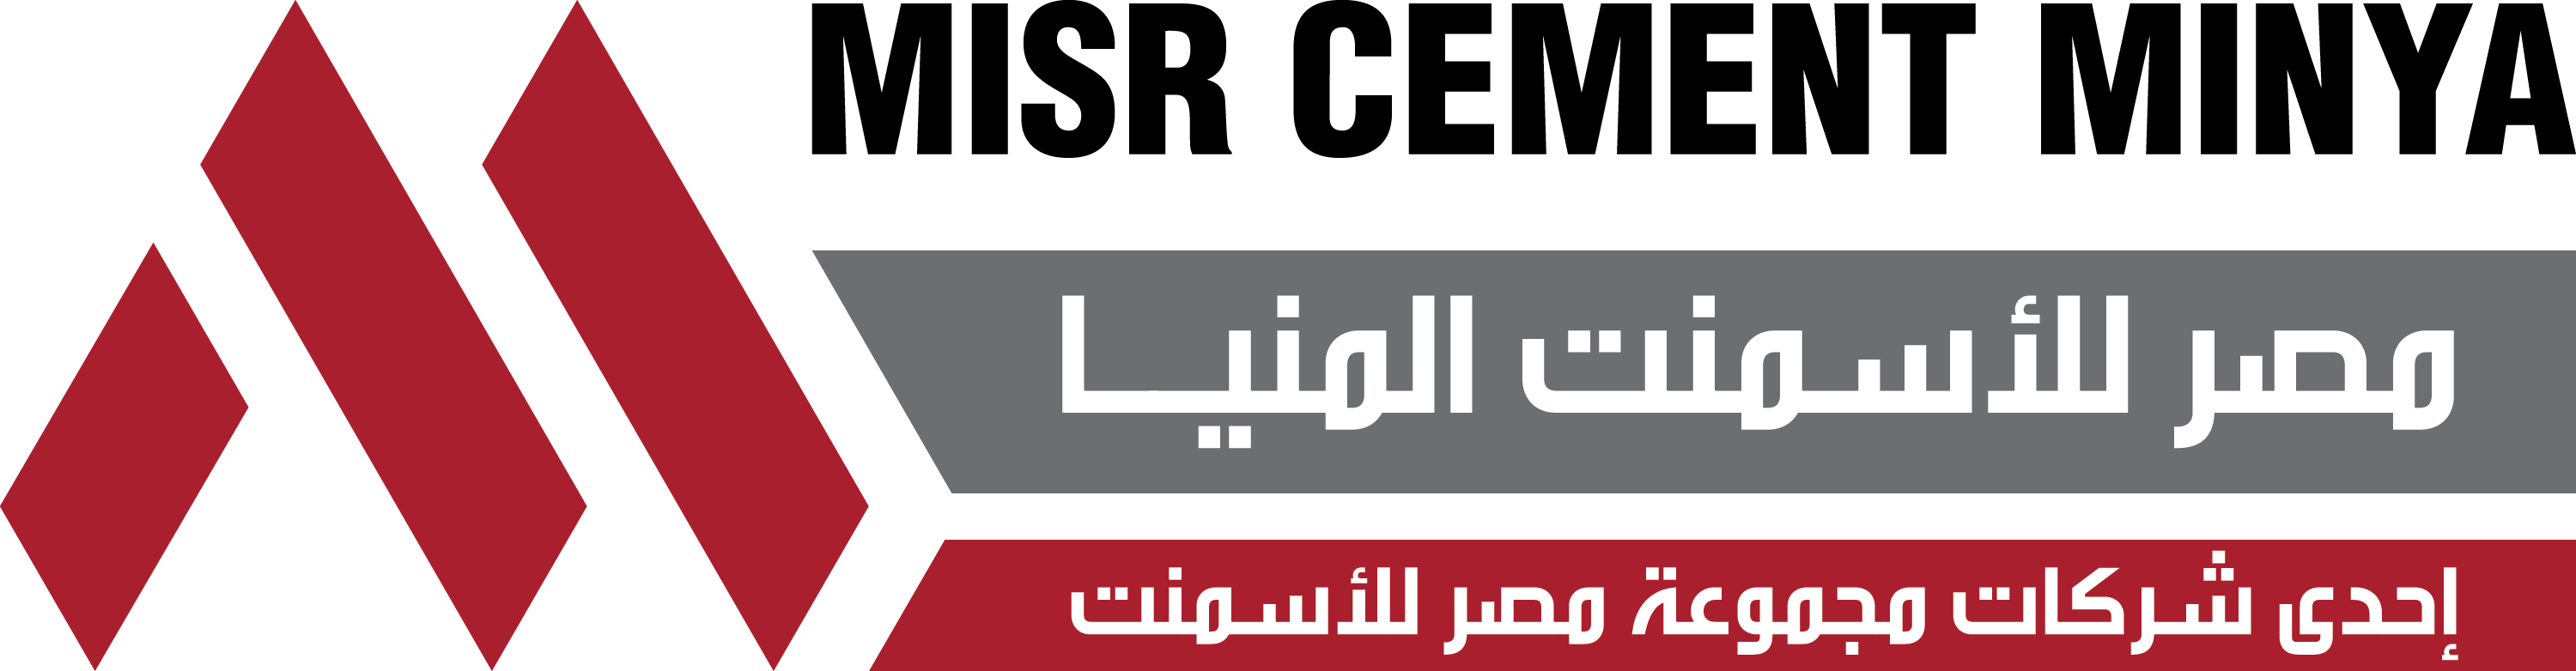 MCG - Logo - Misr Cement Minya - Original - With Group Reference